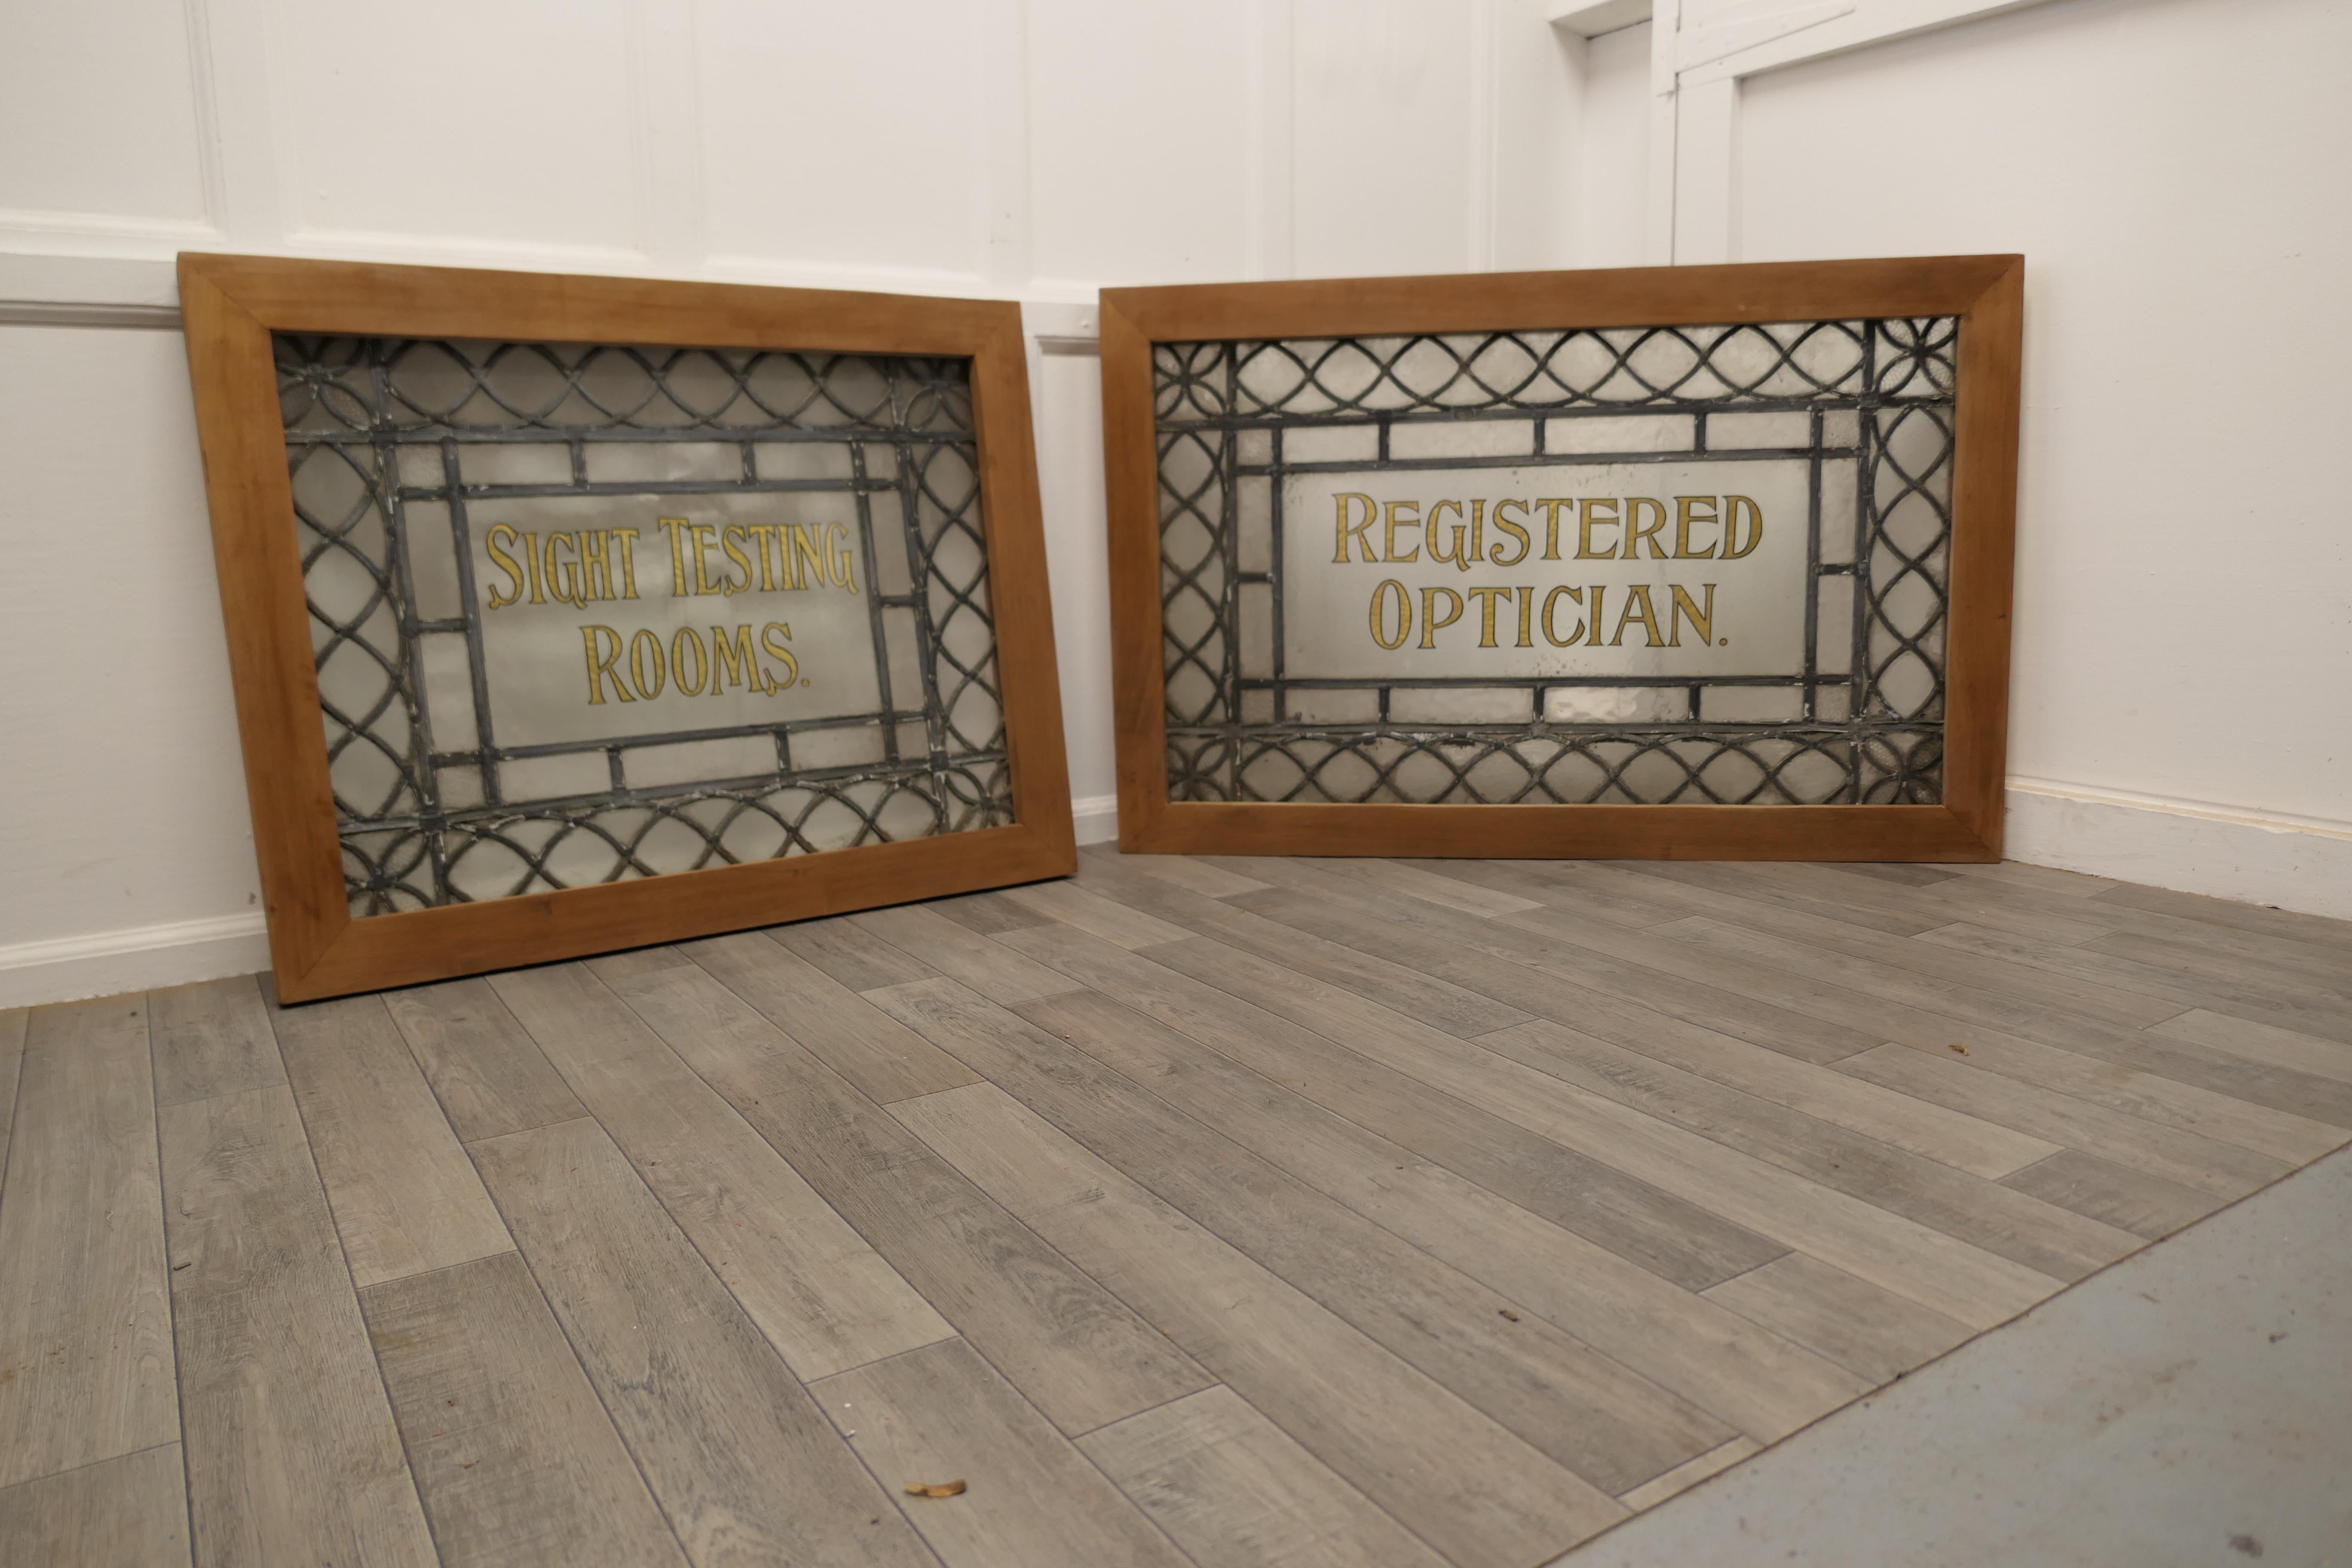 2 Large leaded glass optician’s window signs.

The window signs have both been mounted in a bespoke wooden frame, this is to allow them to be moved about, they lend them selves to being fitted into a new window.
The Centre of each sign has Gold